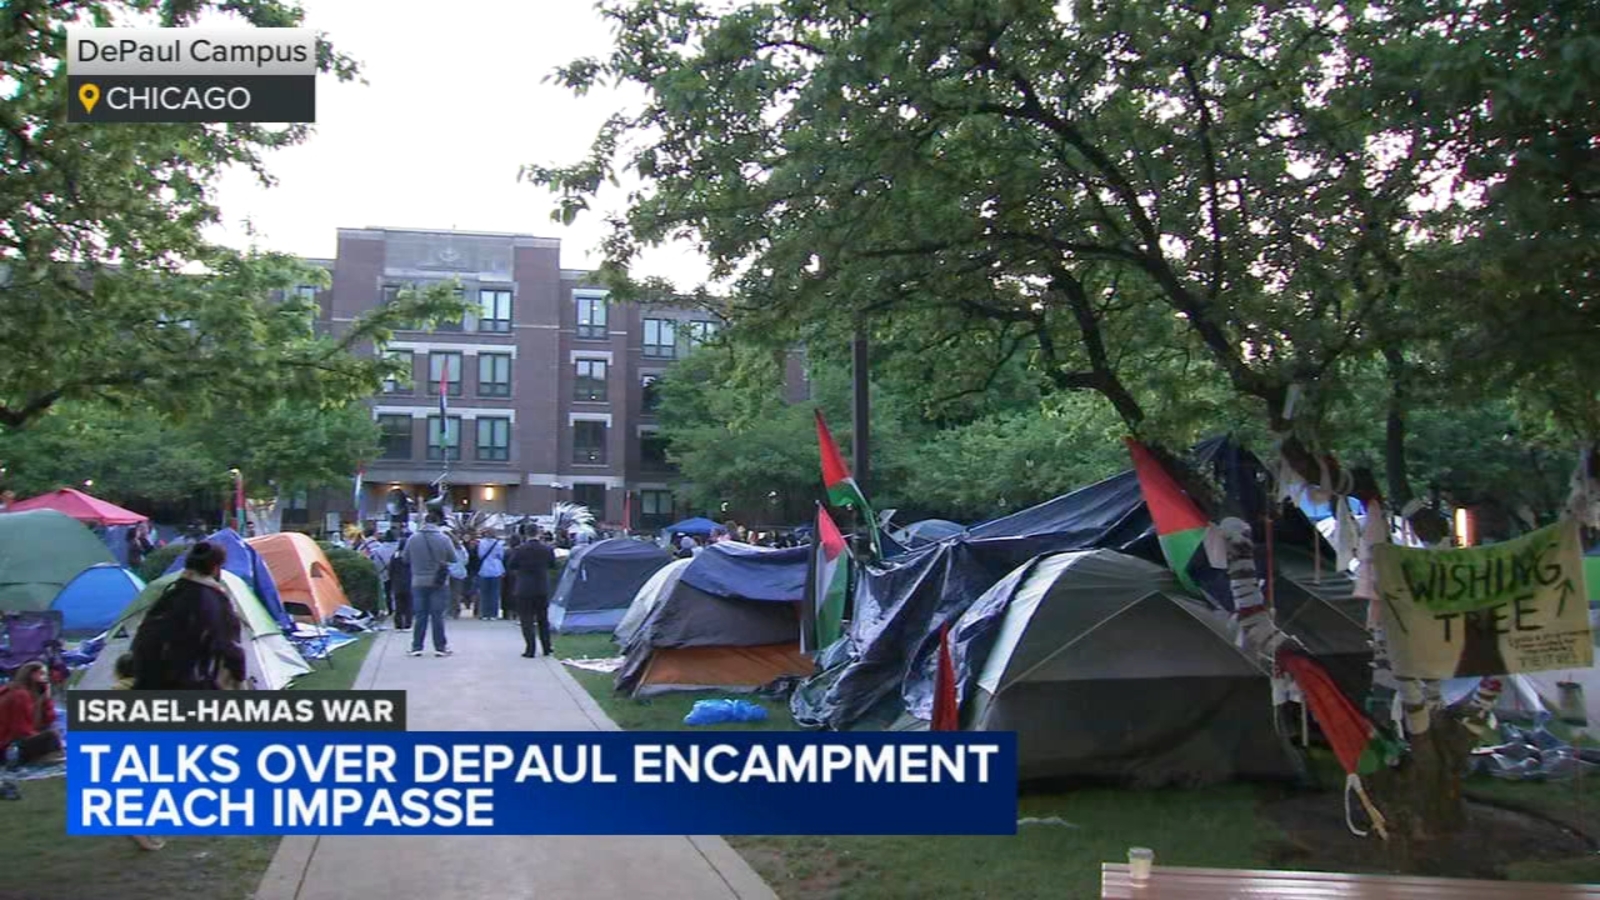 DePaul University President Robert Manuel says discussions with pro-Palestinian encampment organizers ‘are at an impasse’ [Video]